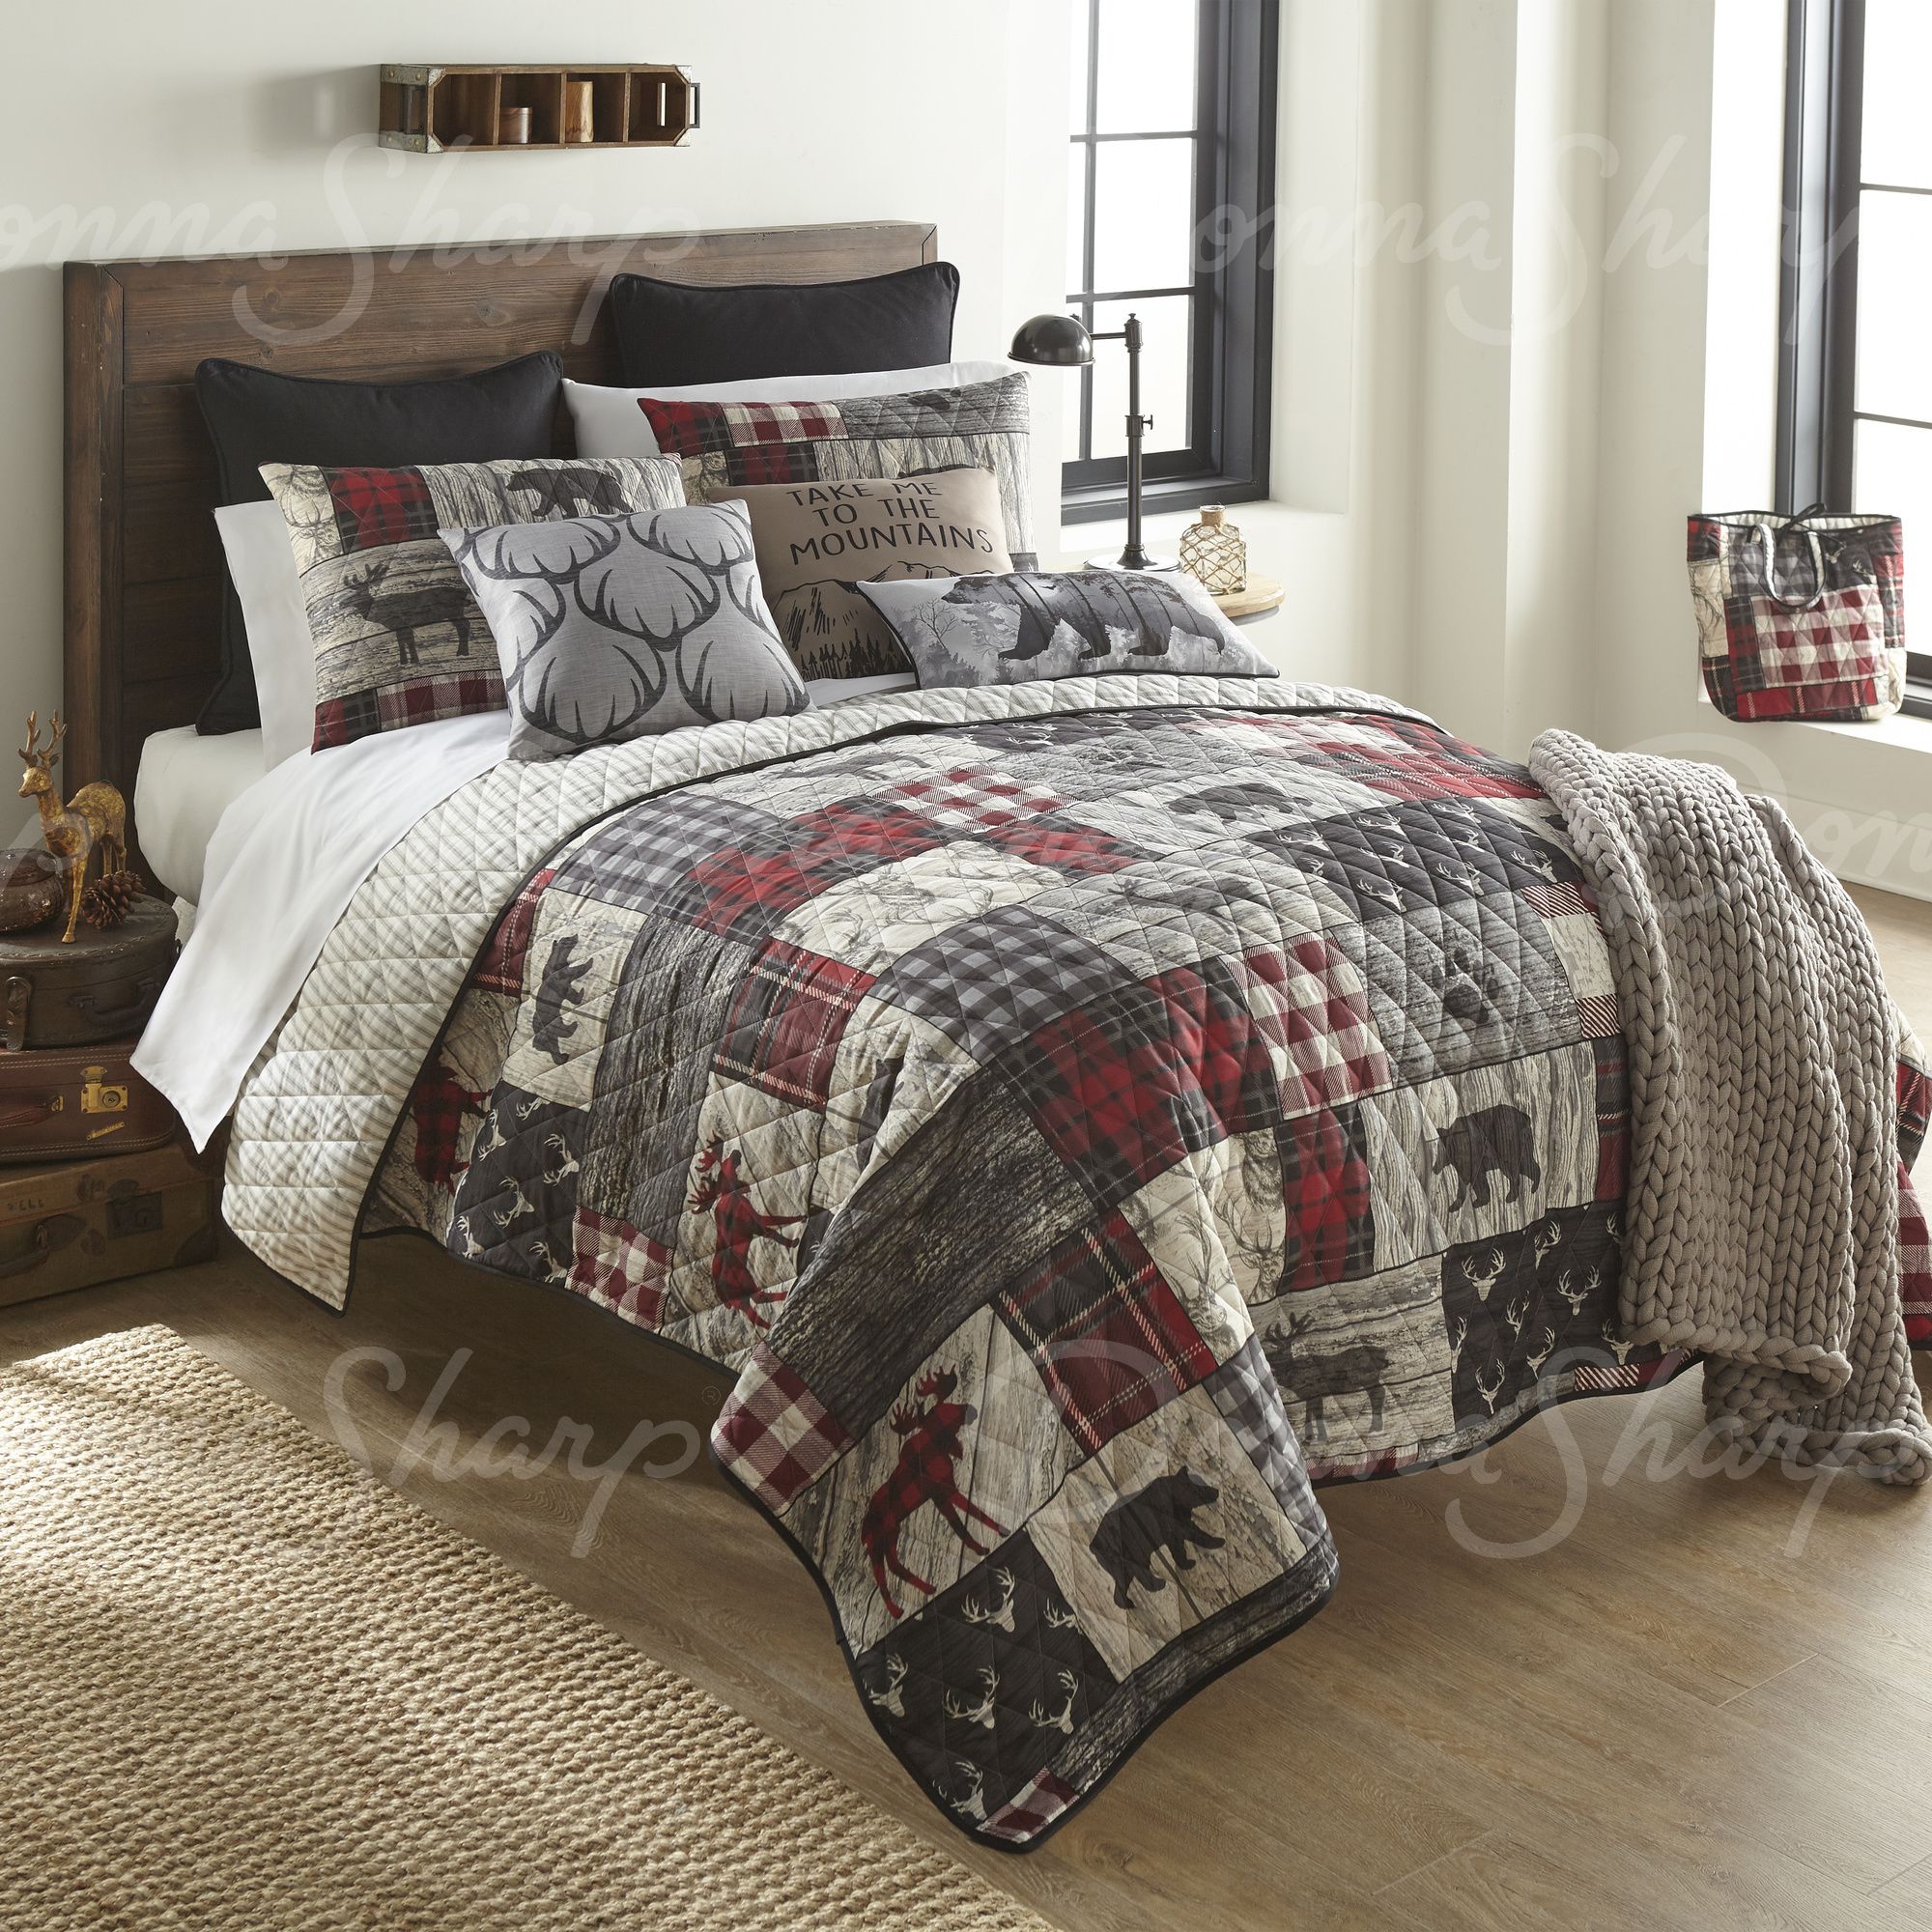 Your Lifestyle by Donna Sharp Timber Quilted Bedding Collection